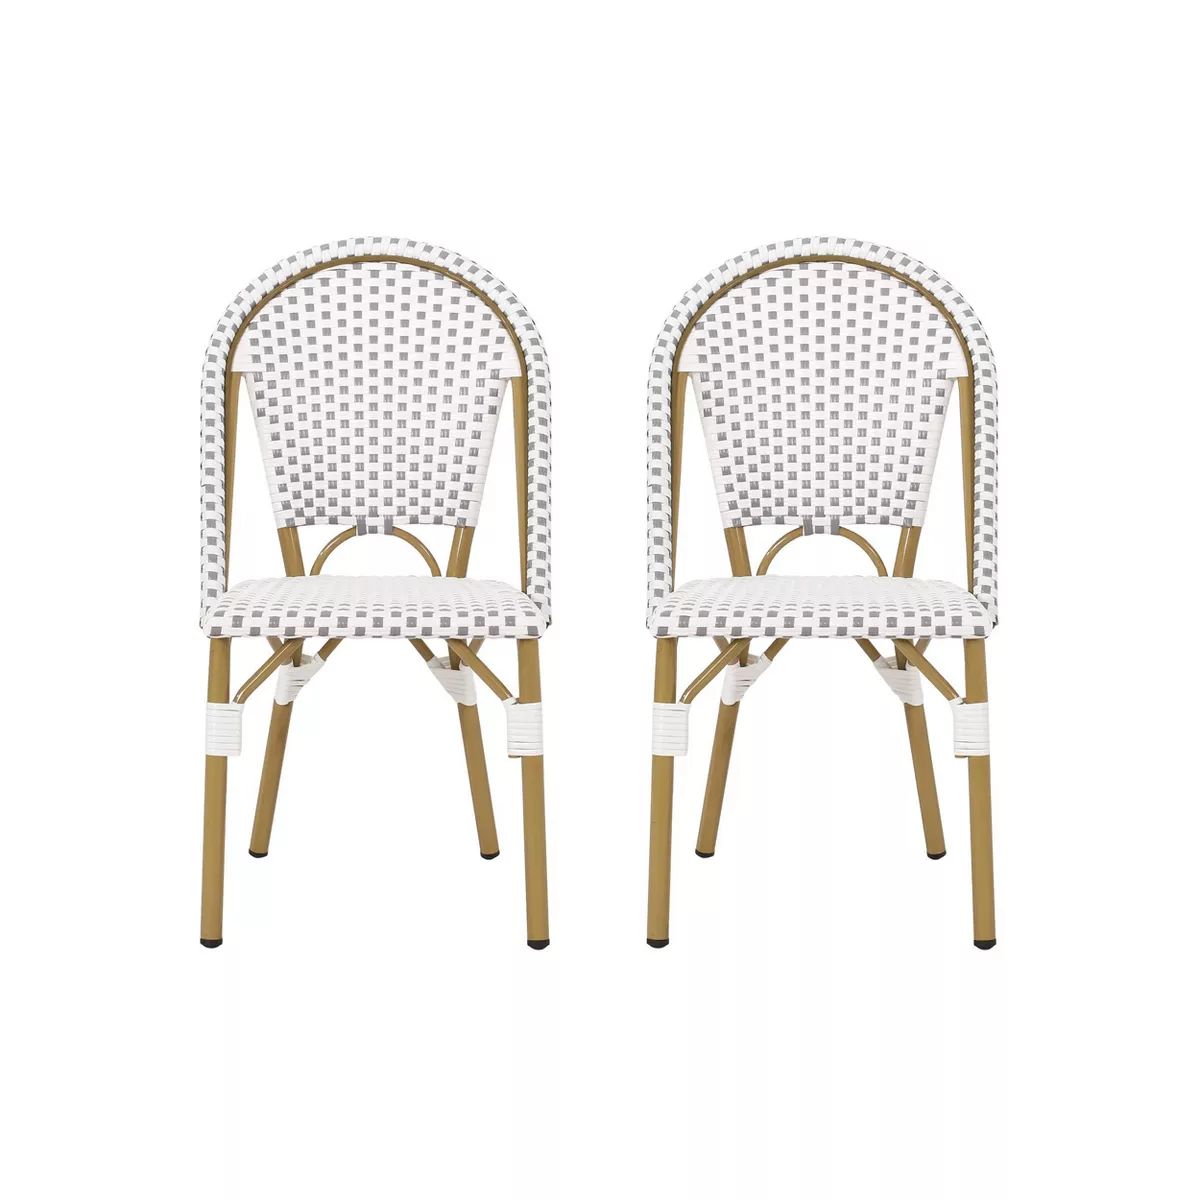 Elize 2pk Outdoor French Bistro Chairs - Gray/White/Bamboo - Christopher Knight Home | Target